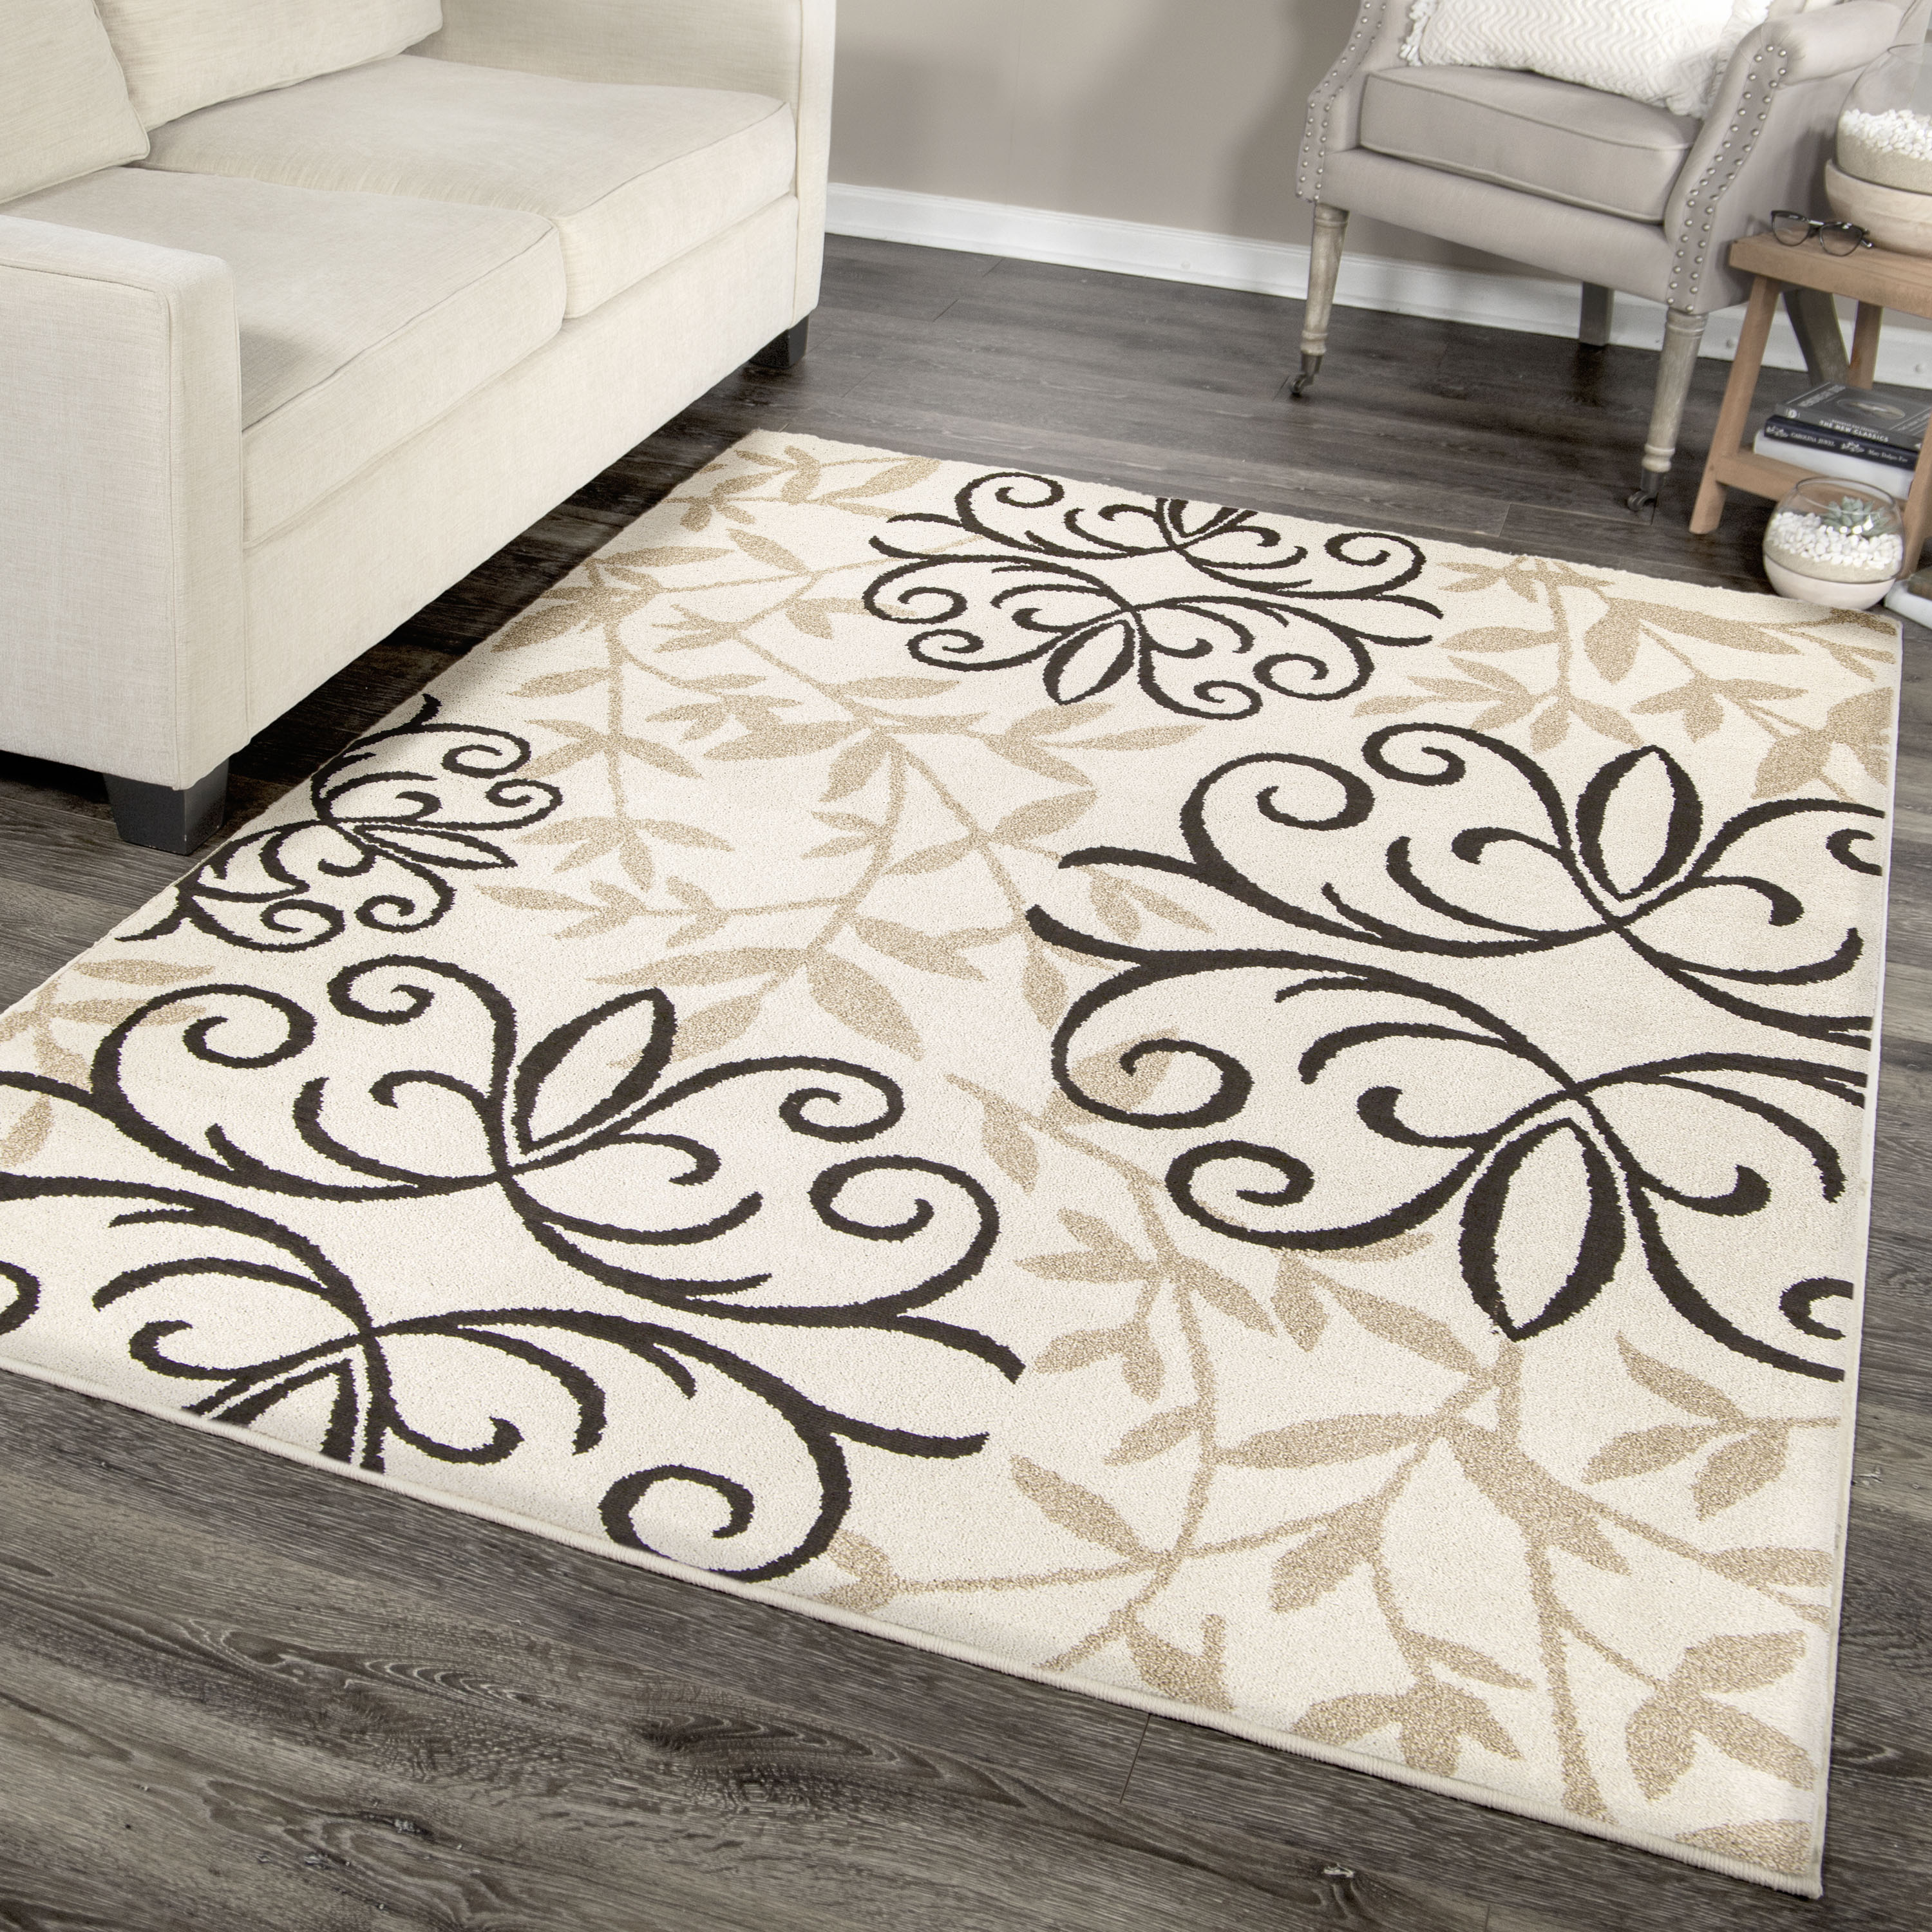 Better Homes & Gardens Iron Fleur 3'11" X 5'5" Off White Floral Rug - image 1 of 8